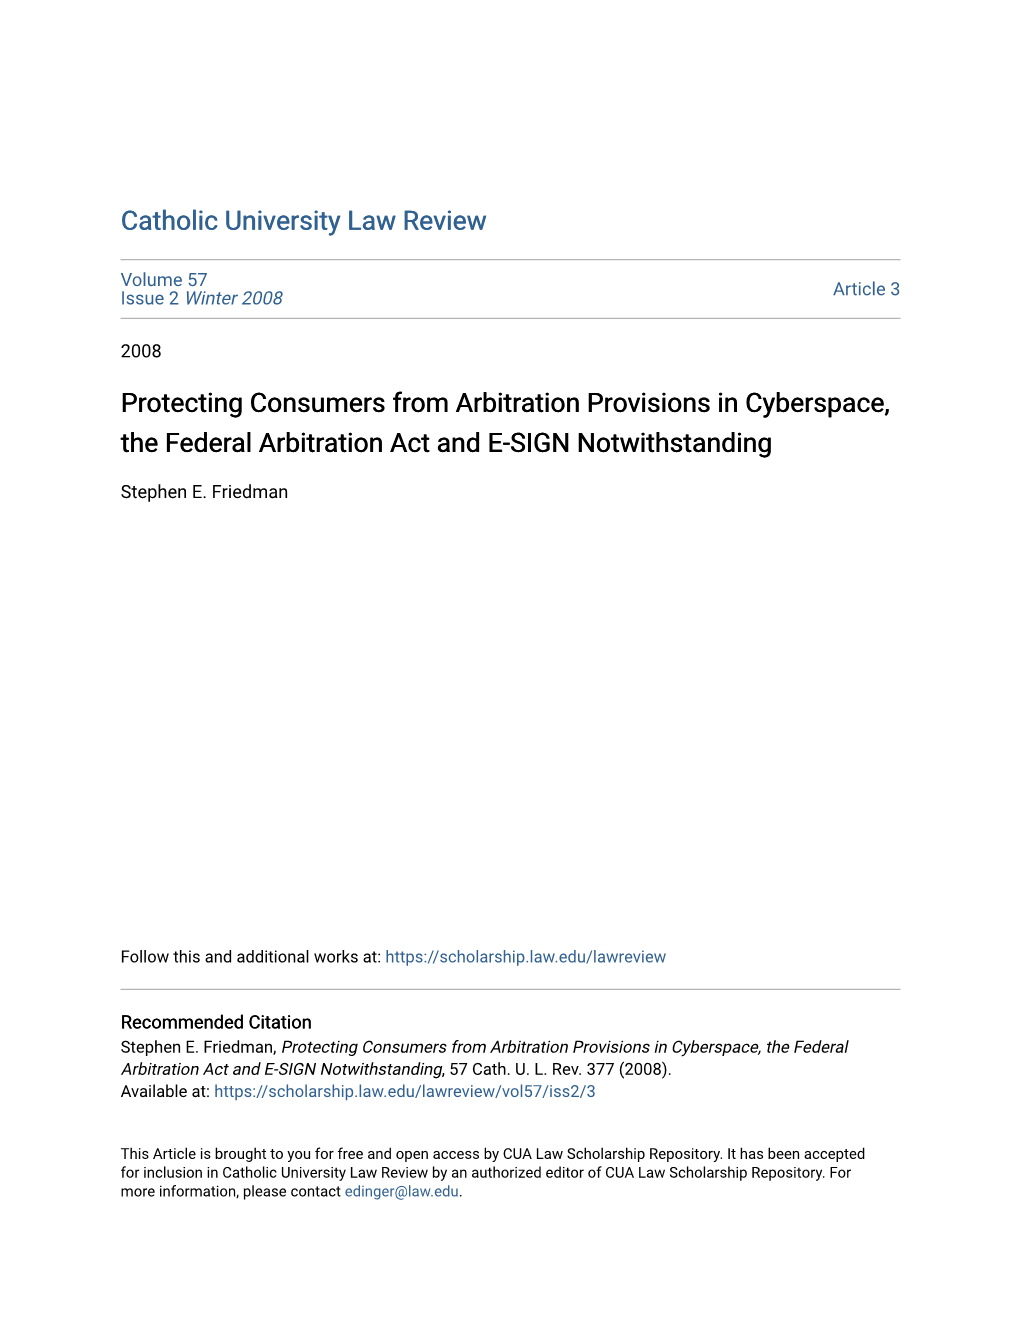 Protecting Consumers from Arbitration Provisions in Cyberspace, the Federal Arbitration Act and E-SIGN Notwithstanding